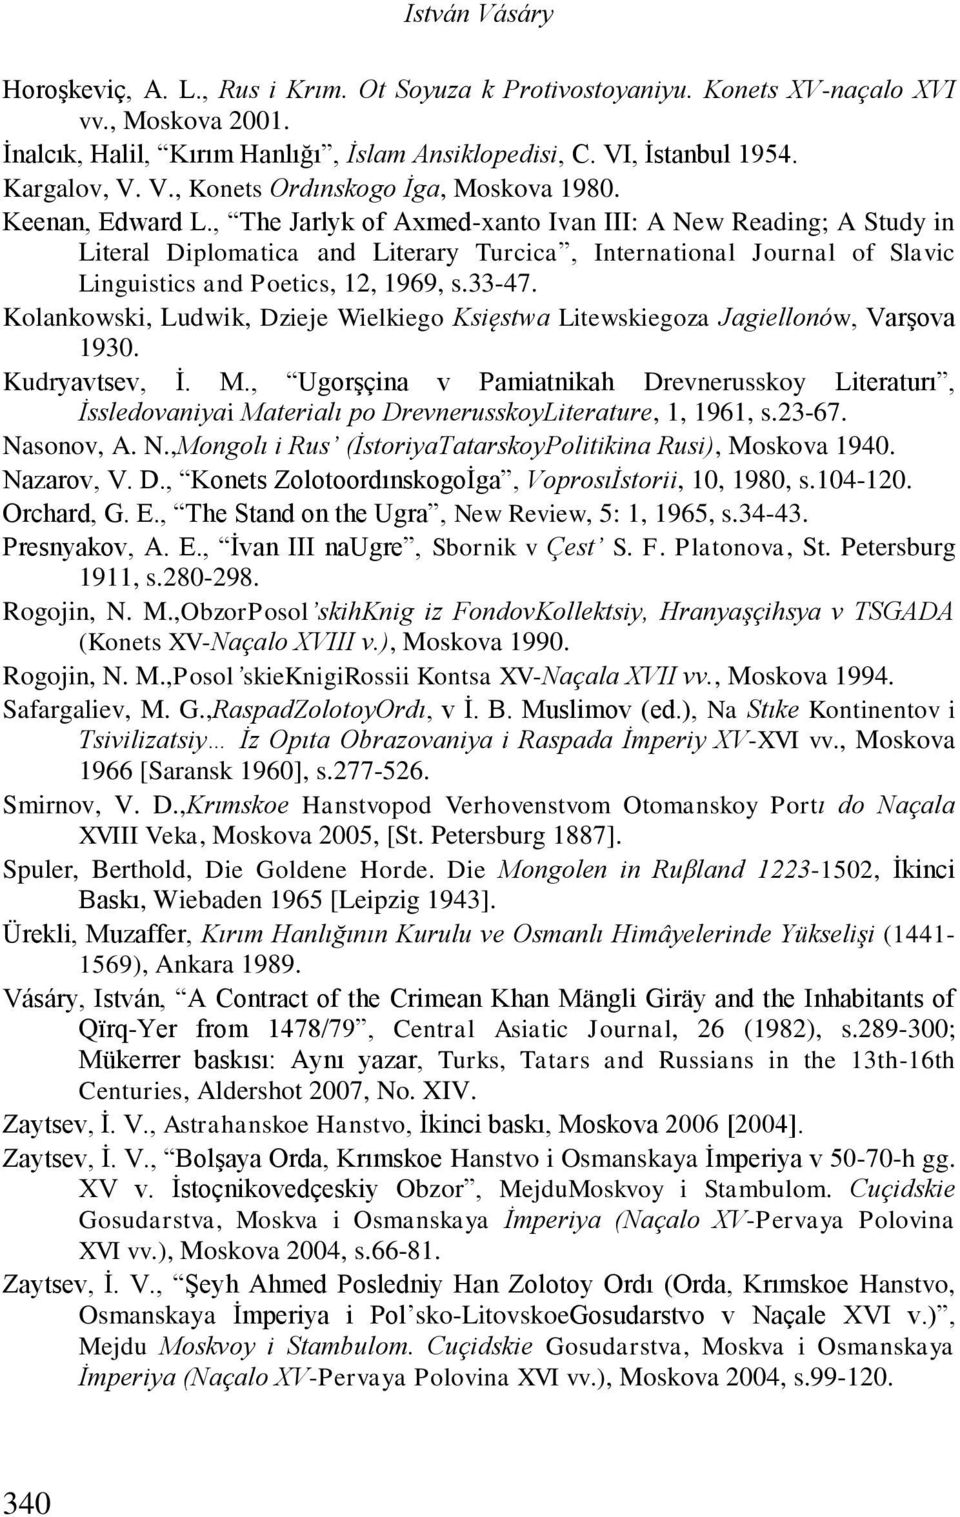 , The Jarlyk of Axmed-xanto Ivan III: A New Reading; A Study in Literal Diplomatica and Literary Turcica, International Journal of Slavic Linguistics and Poetics, 12, 1969, s.33-47.